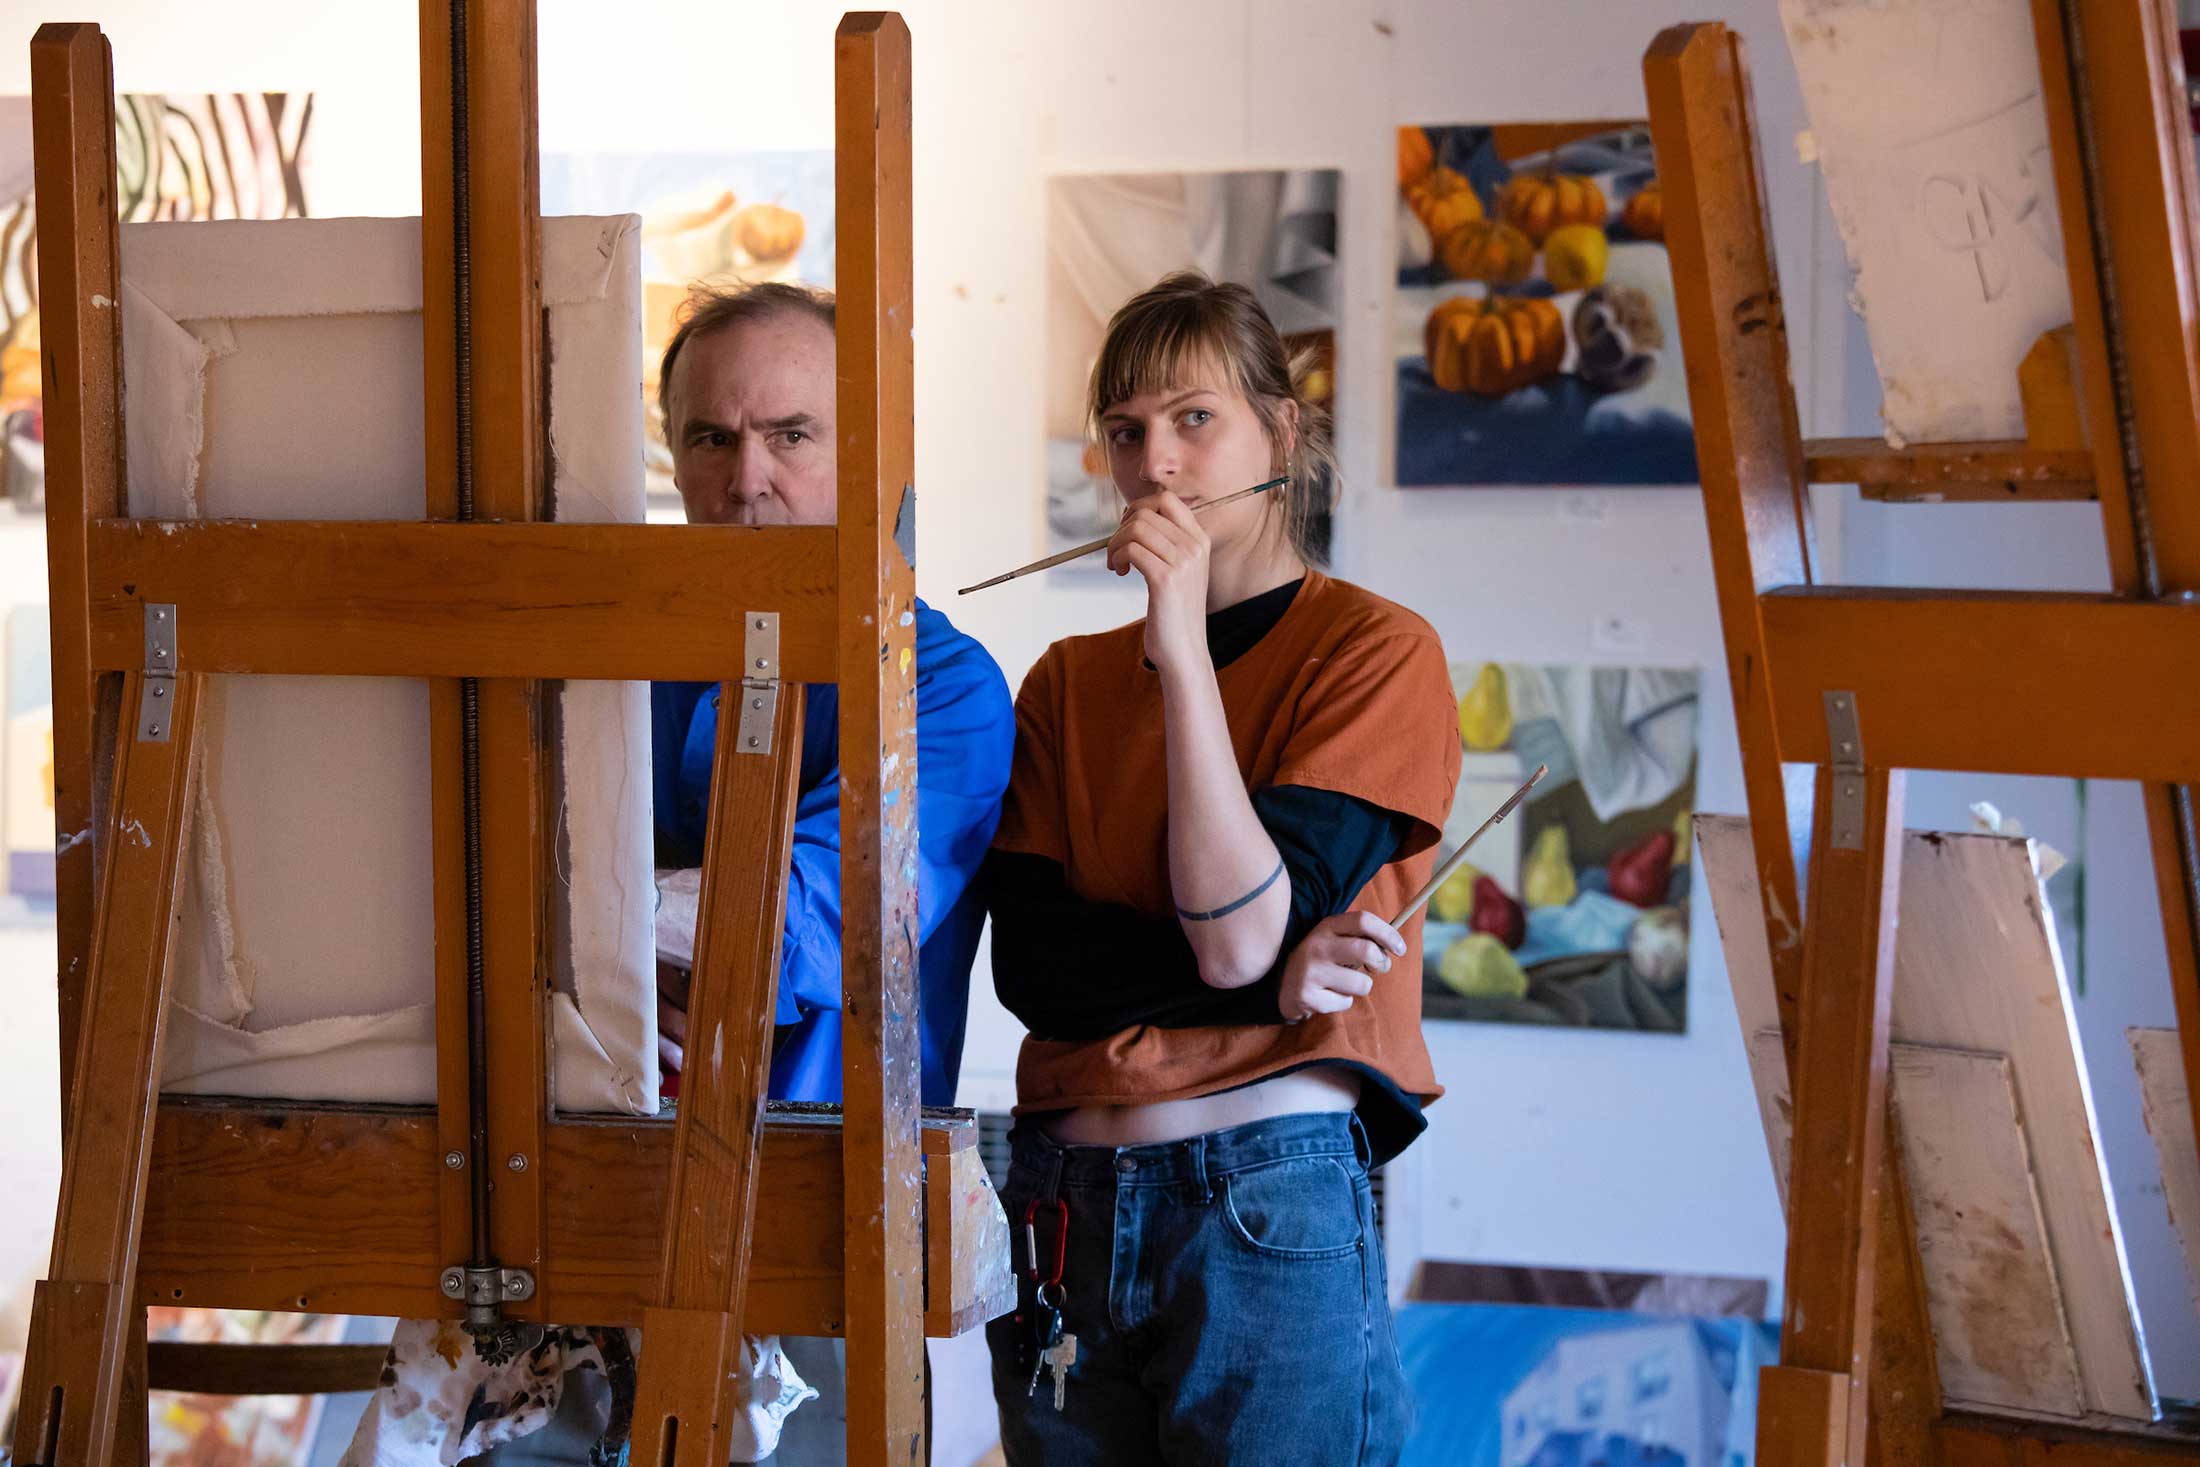 Two people stand before an easel contemplating a painting in progress